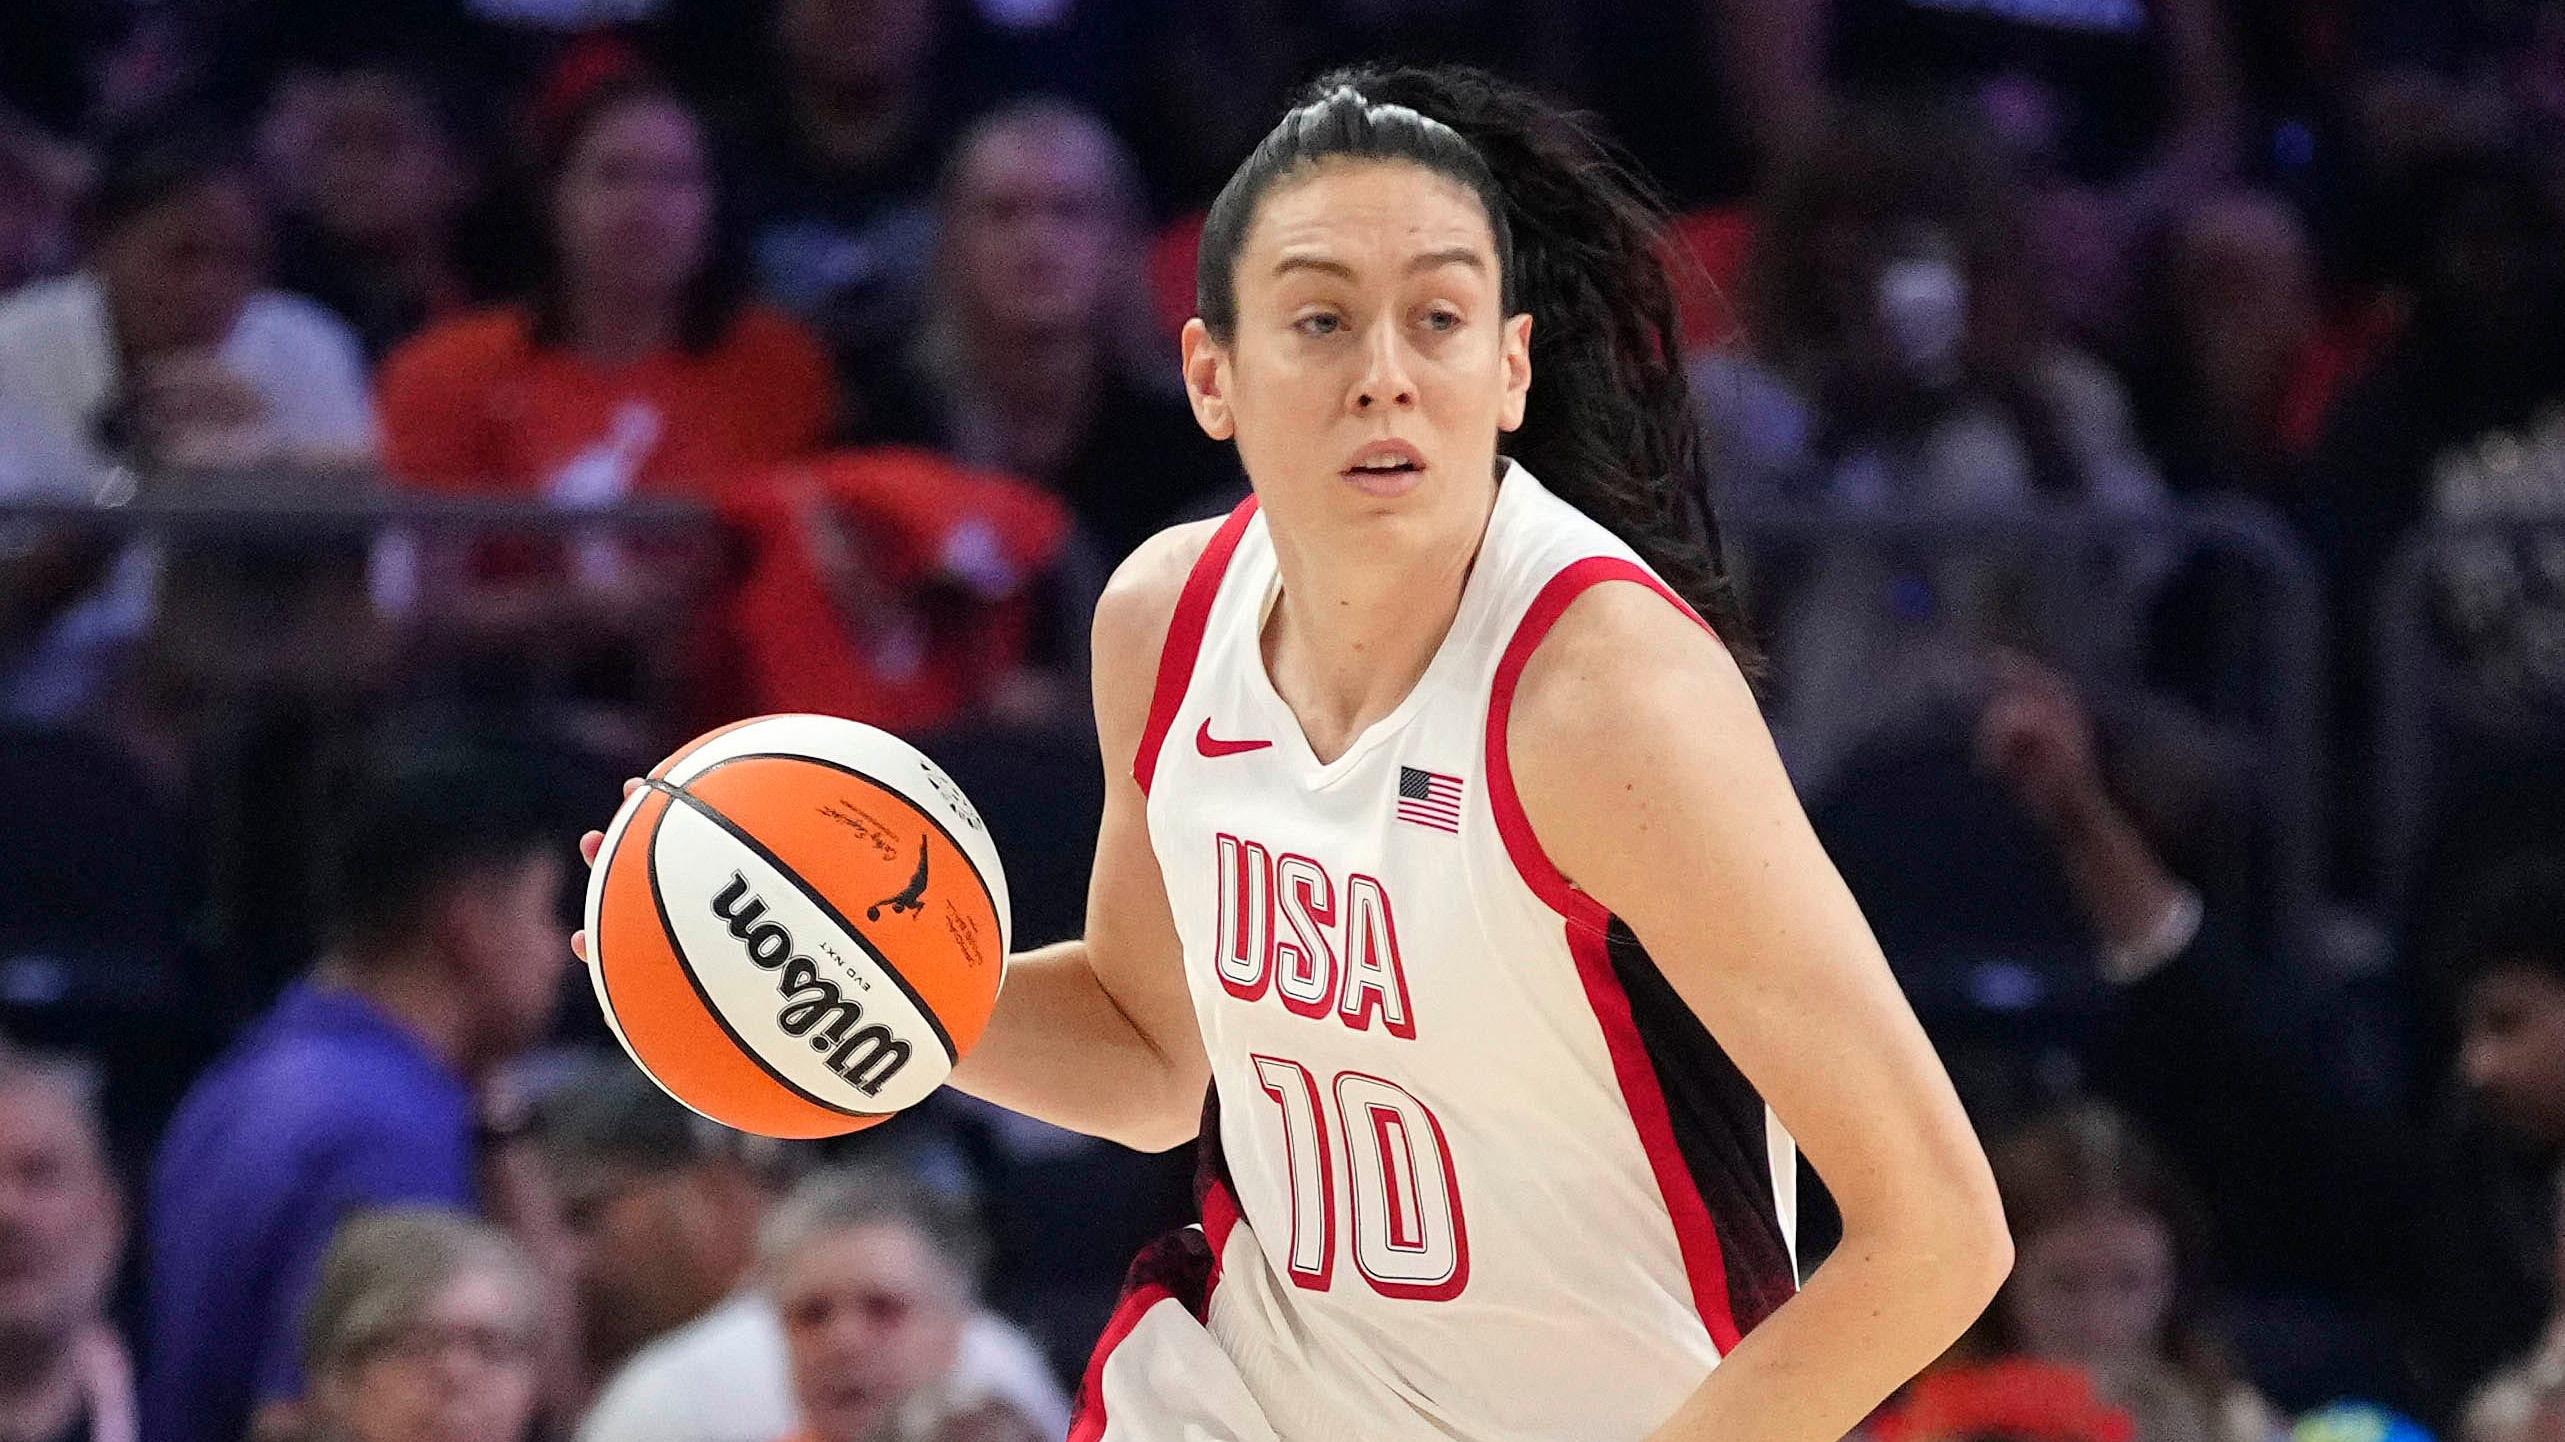 Team USA forward Breanna Stewart (10) dribbles up the court against the WNBA Team during the WNBA All-Star Game in Phoenix on July 20, 2024.